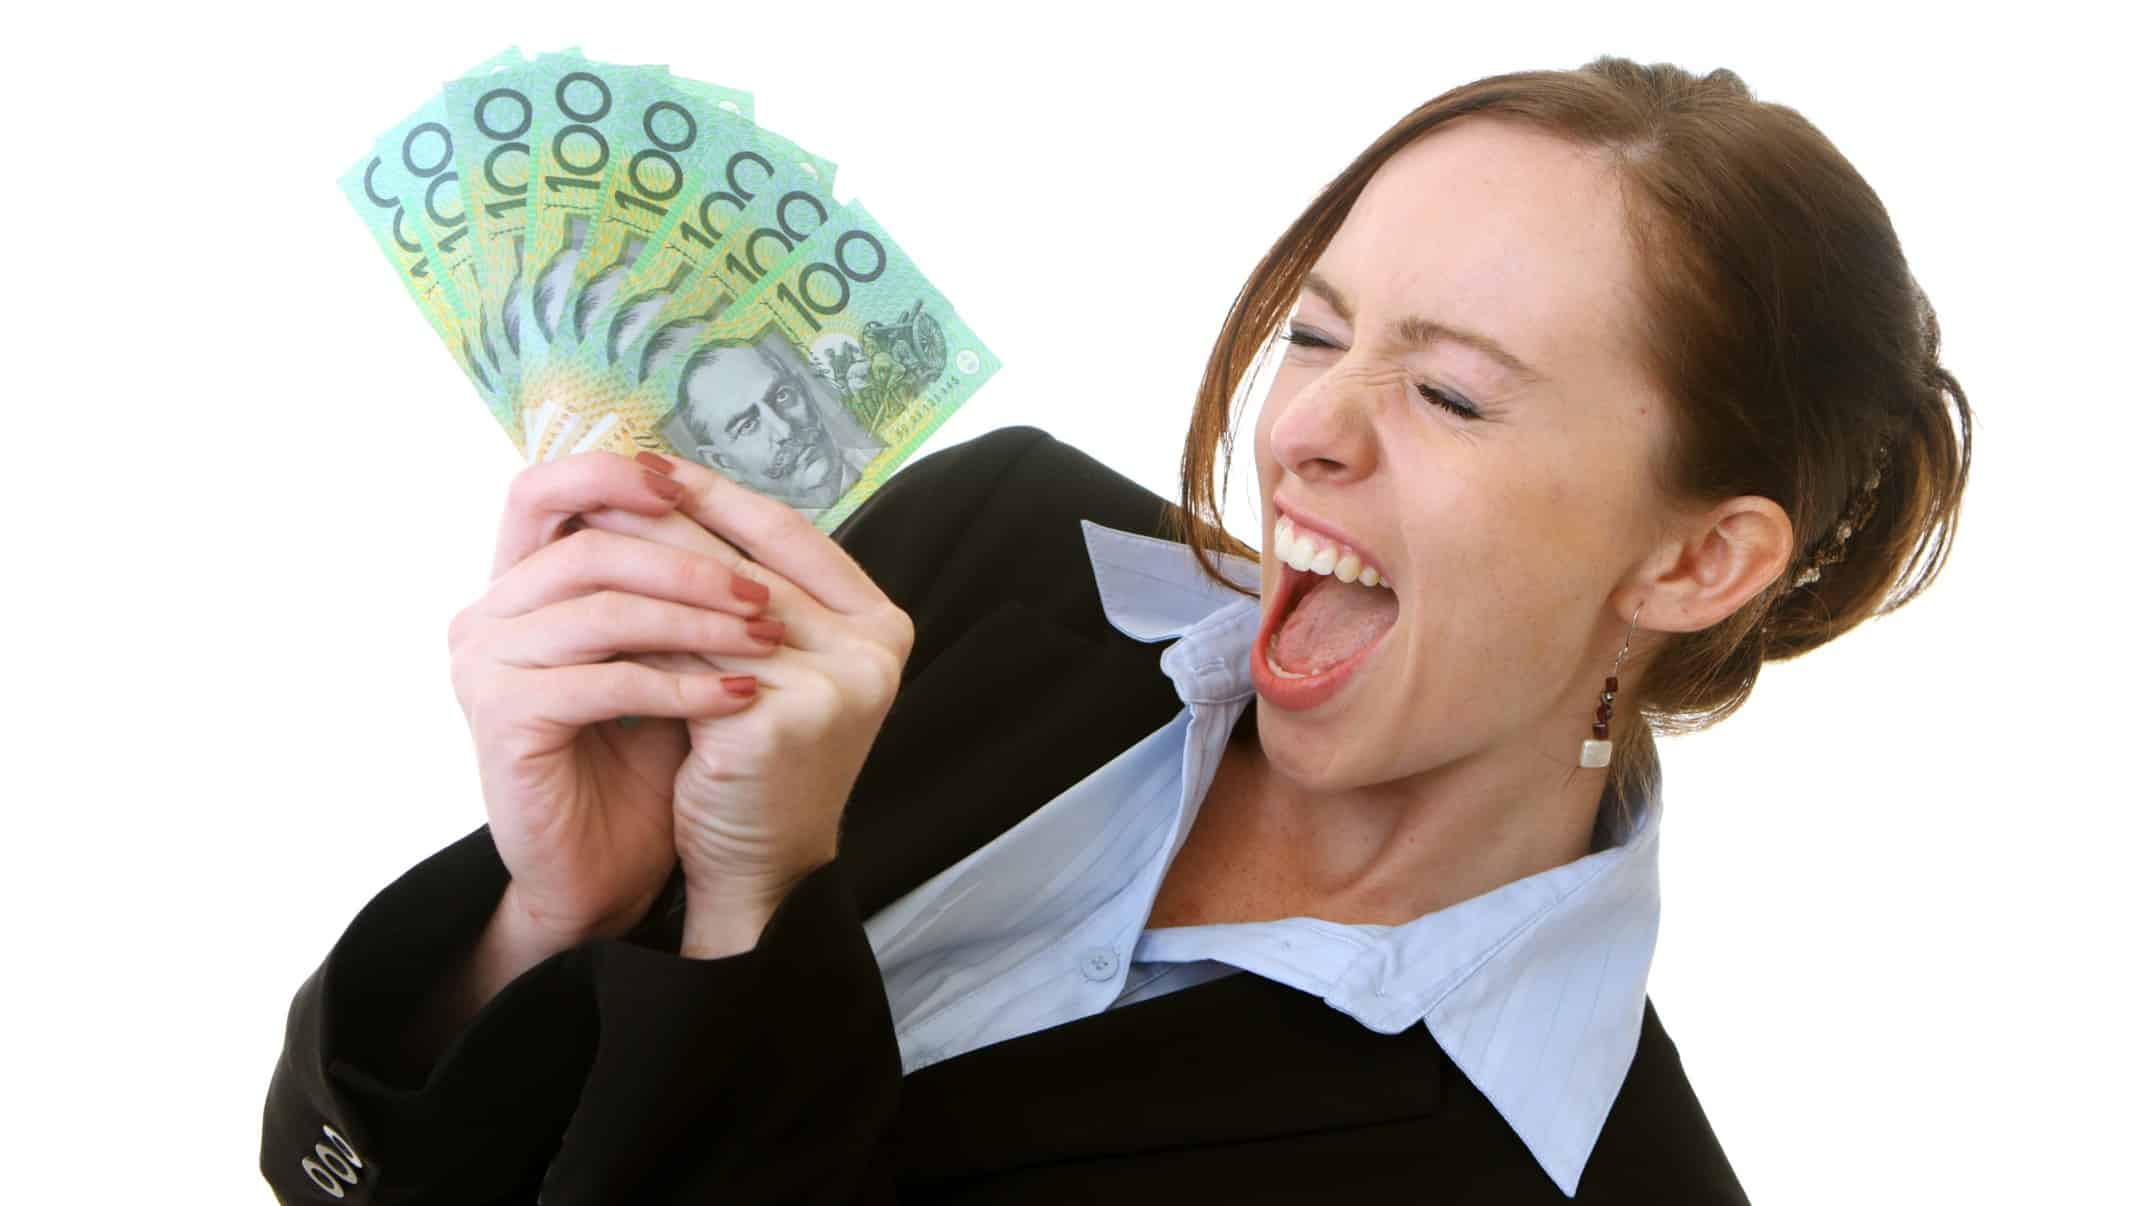 A business woman holding a wad of cash celebrates a dividends windfall